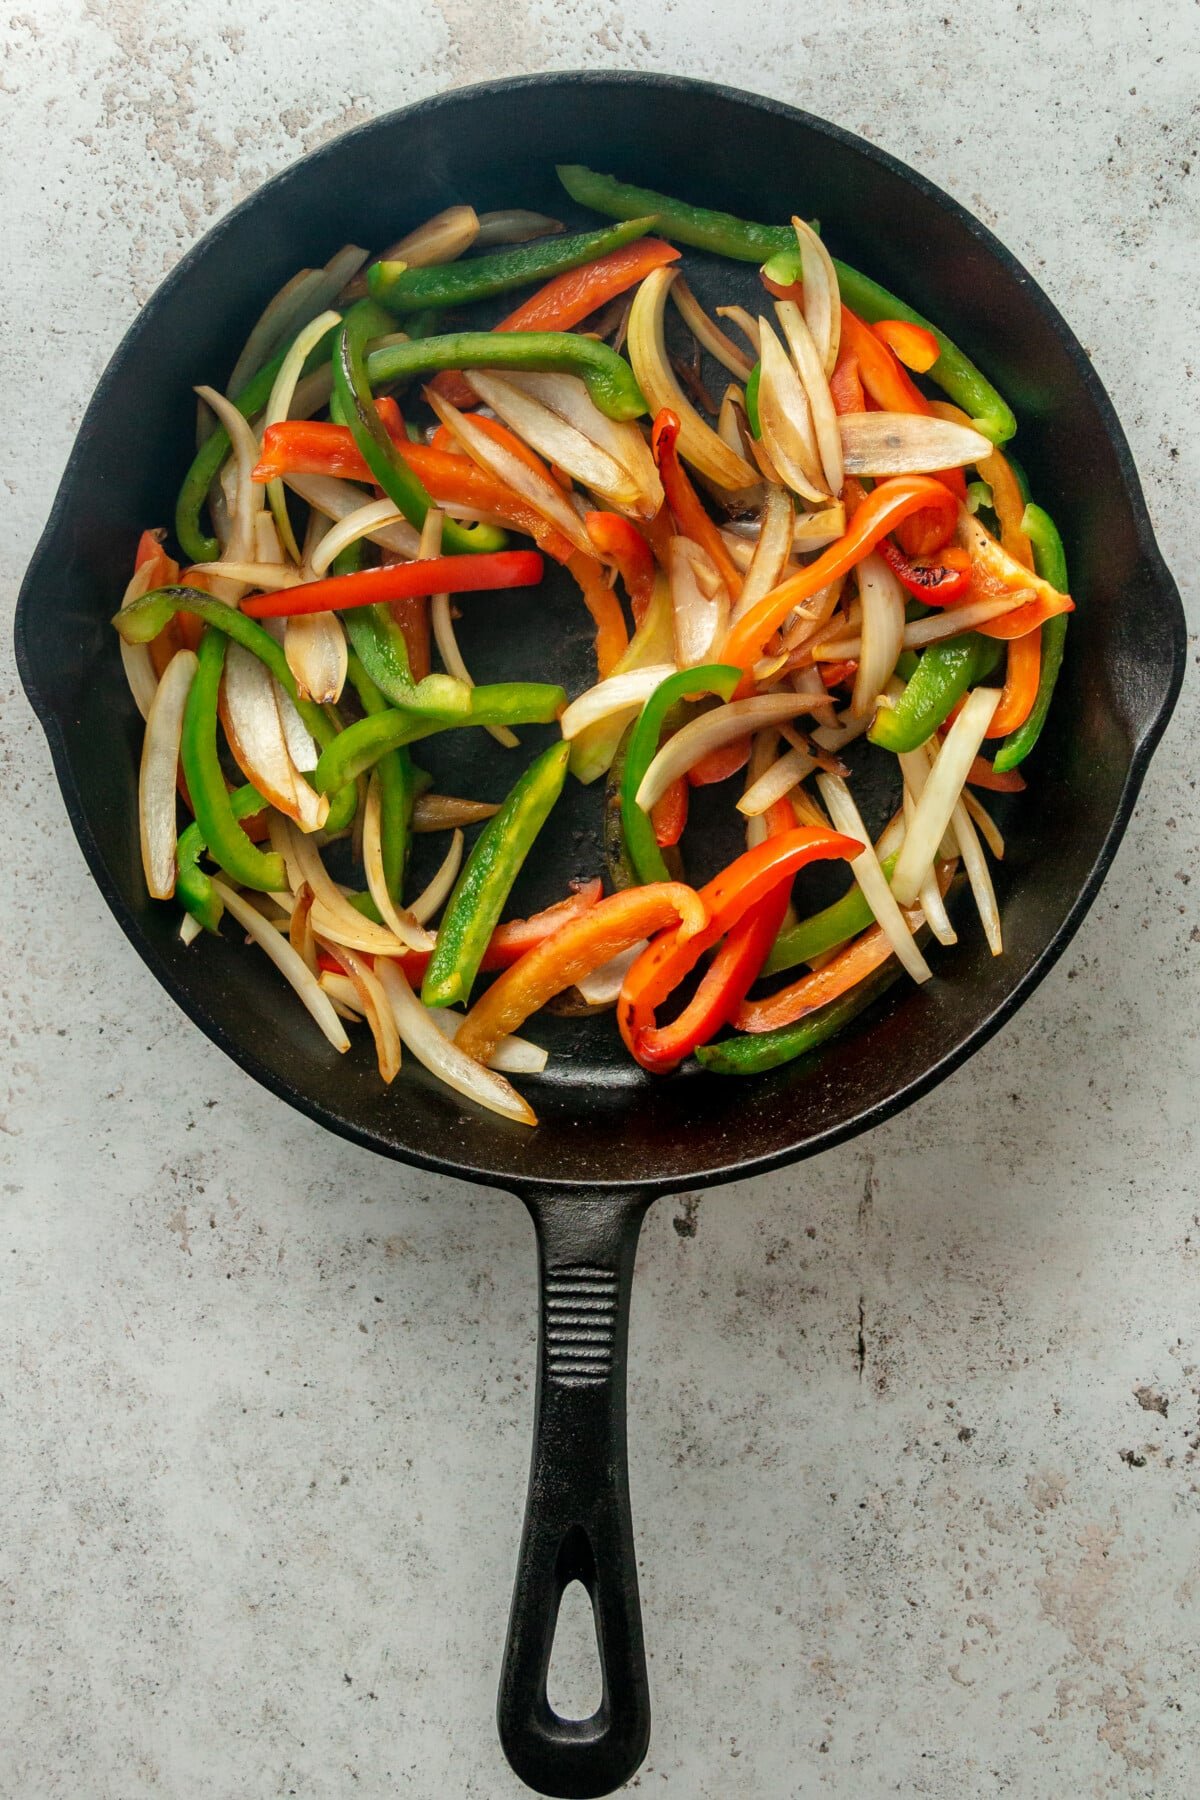 Slices of cooked peppers and onion sit in a cast iron skillet on a light grey surface.